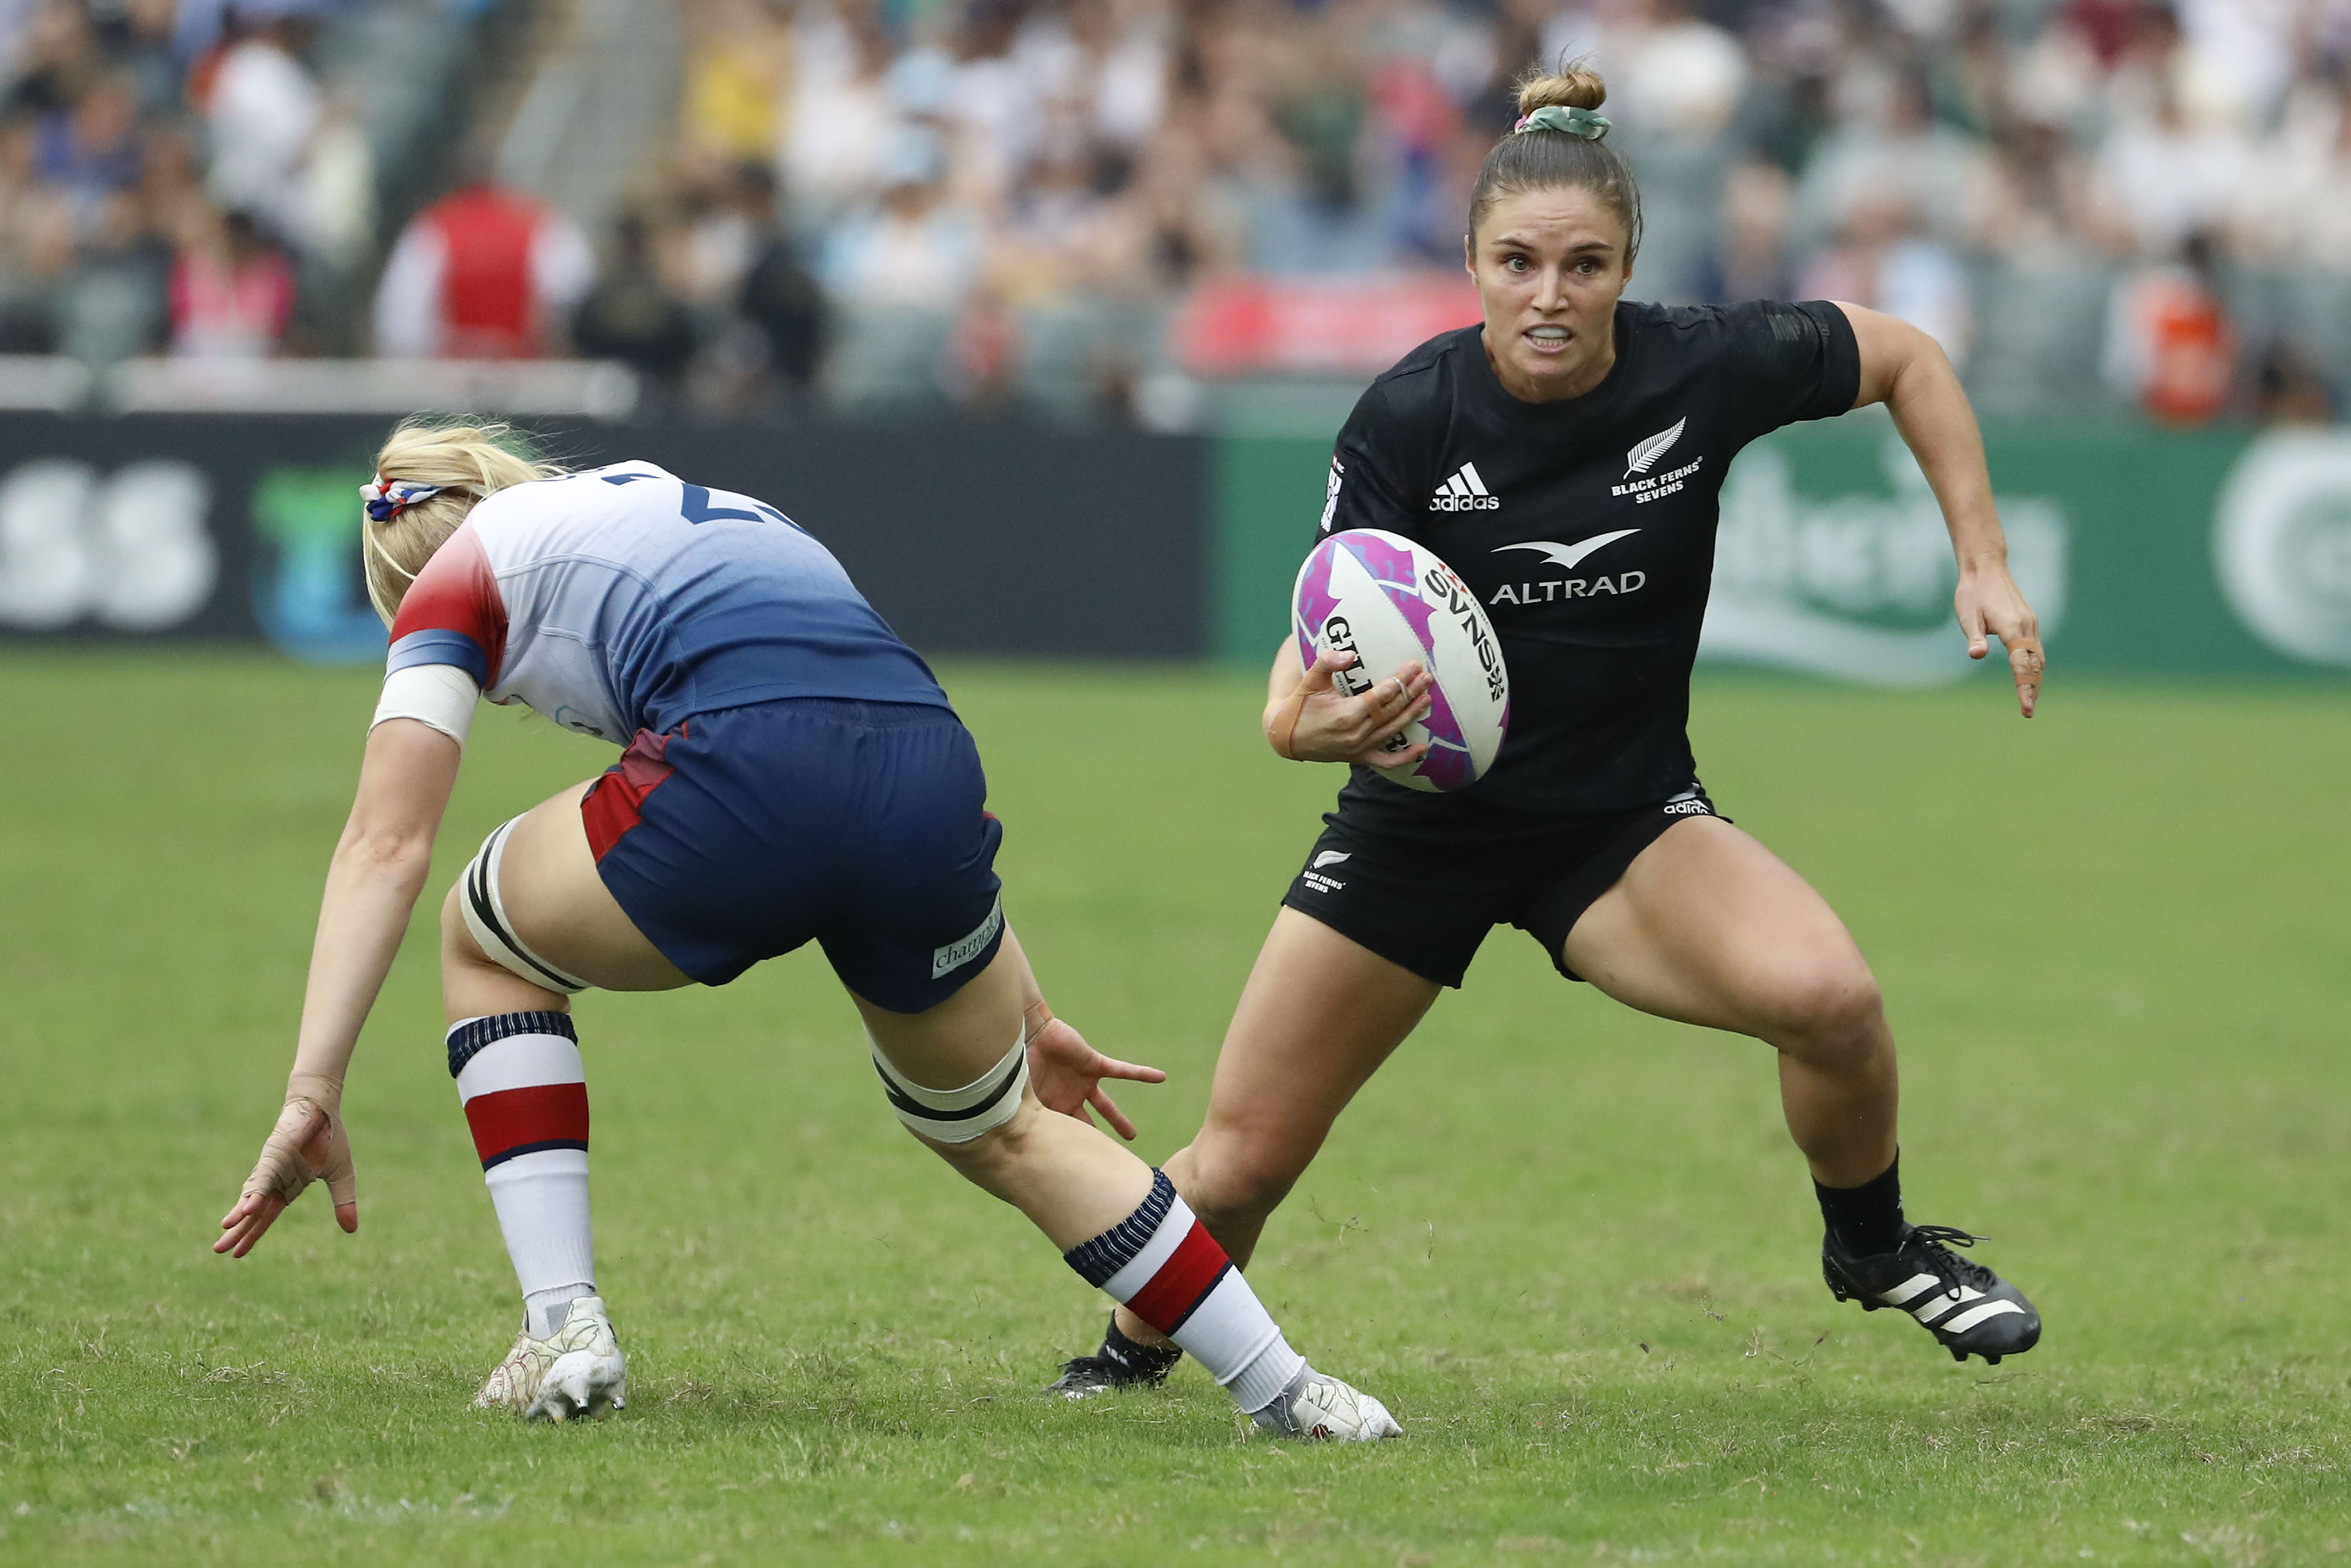 New Zealand Sevens teams named for Singapore